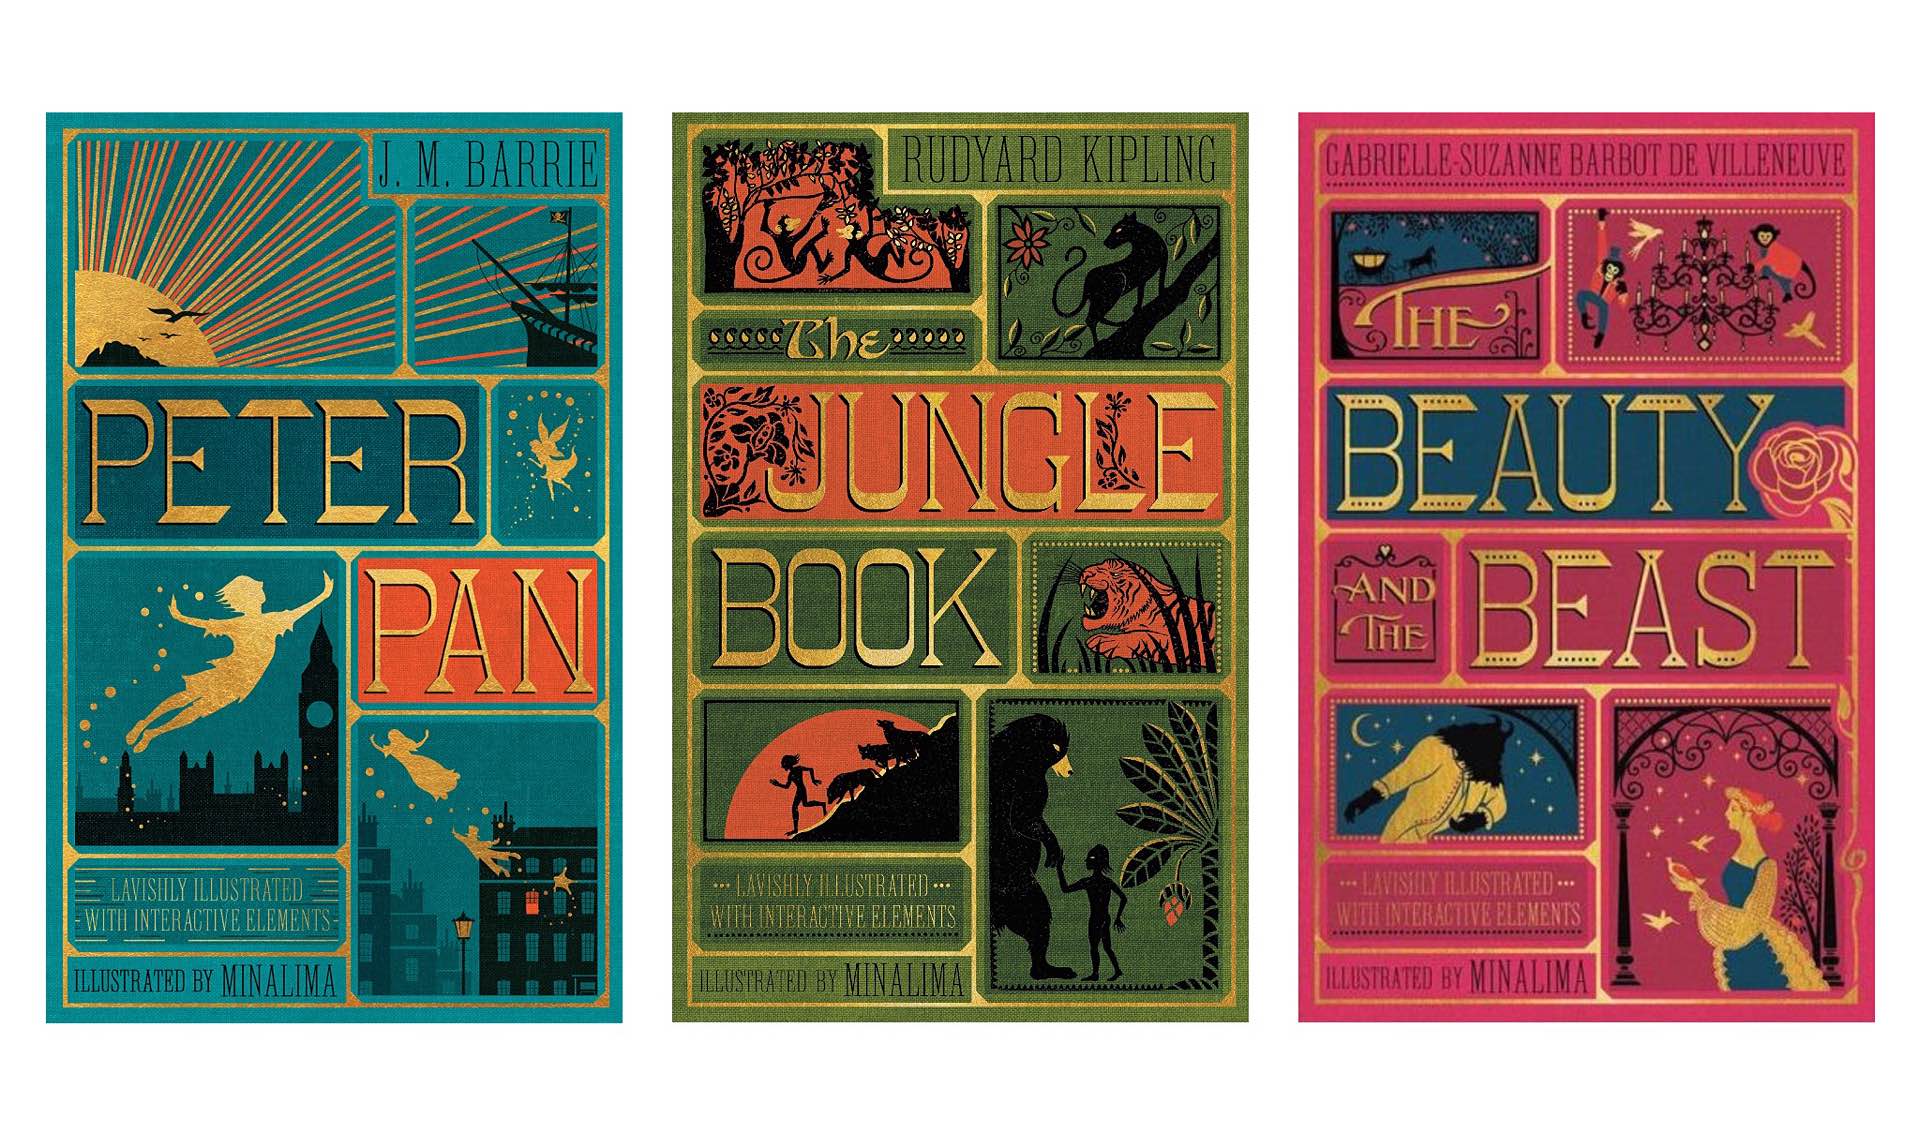 Illustrated Children's Classics by MinaLima. (~$21 for each hardcover)